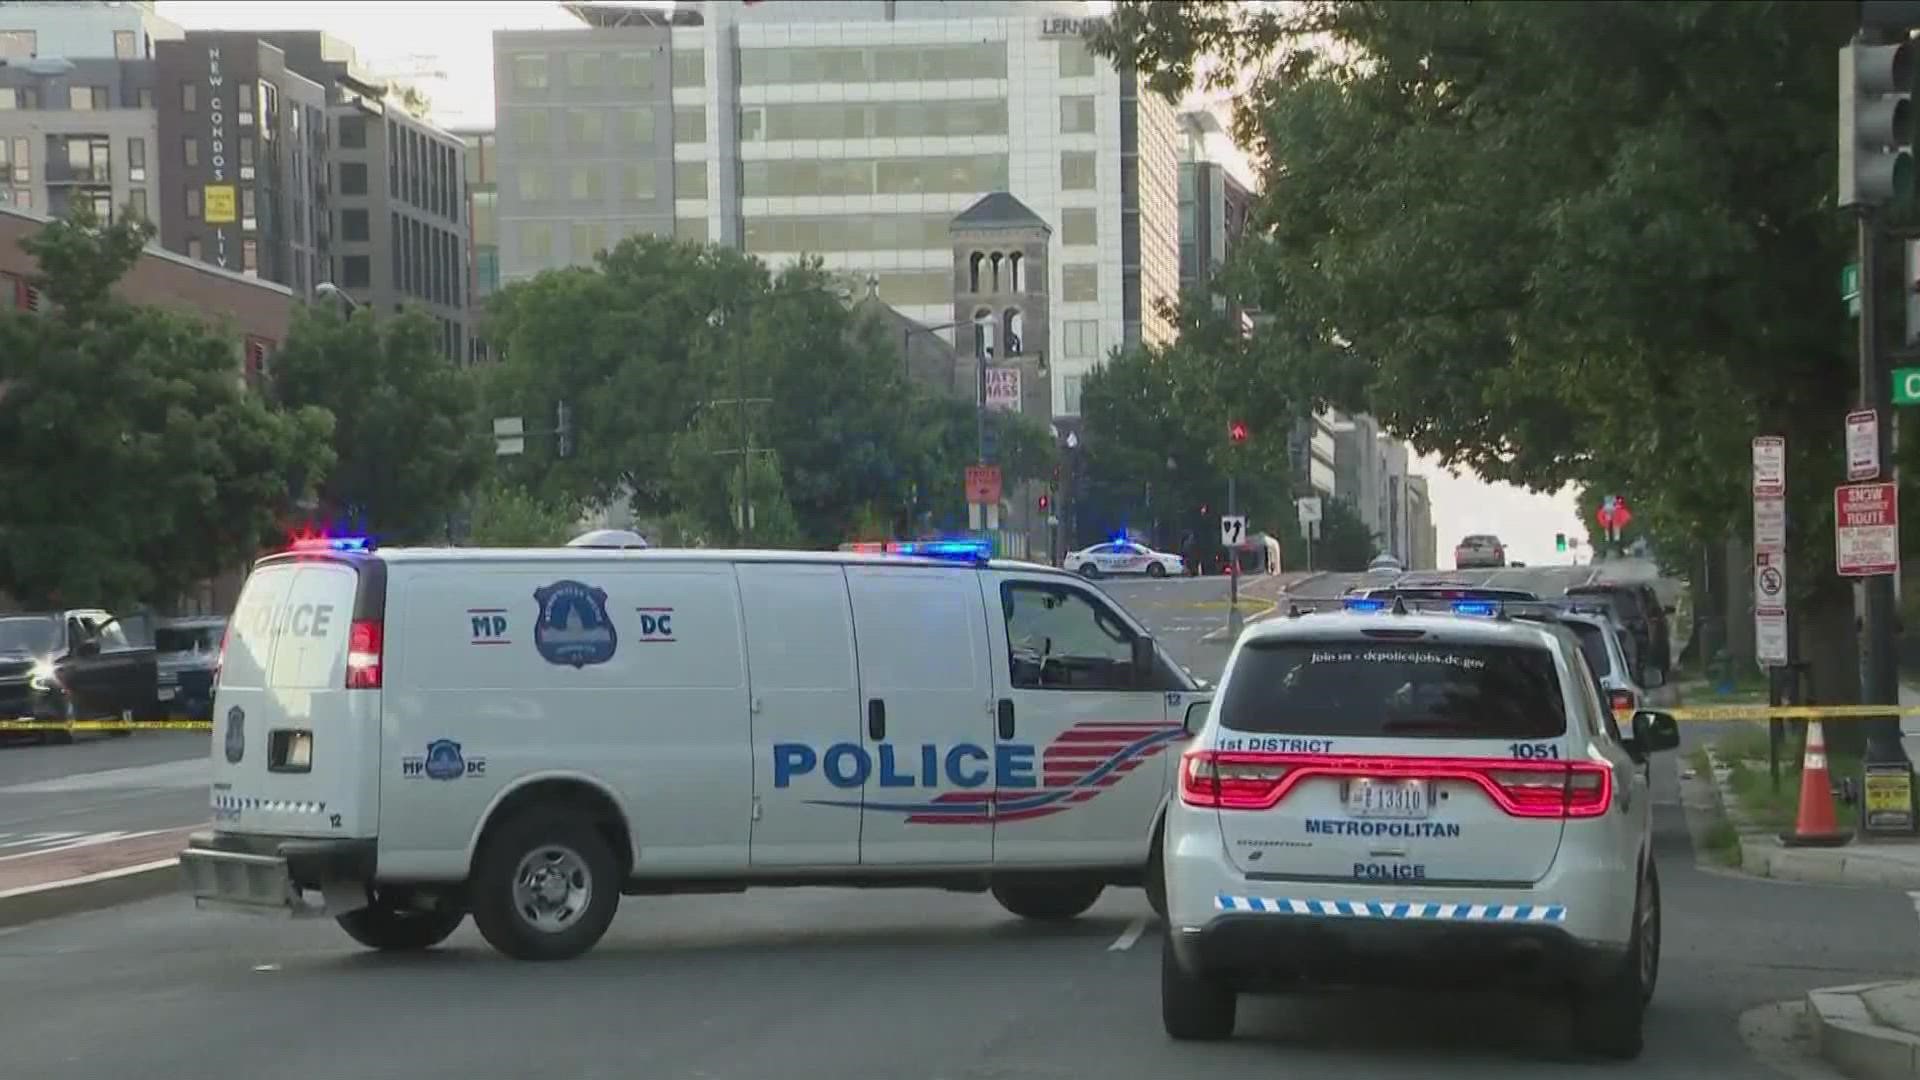 MPD officers have closed a portion of M Street Southwest to assist the DEA and the FBI in serving a warrant.